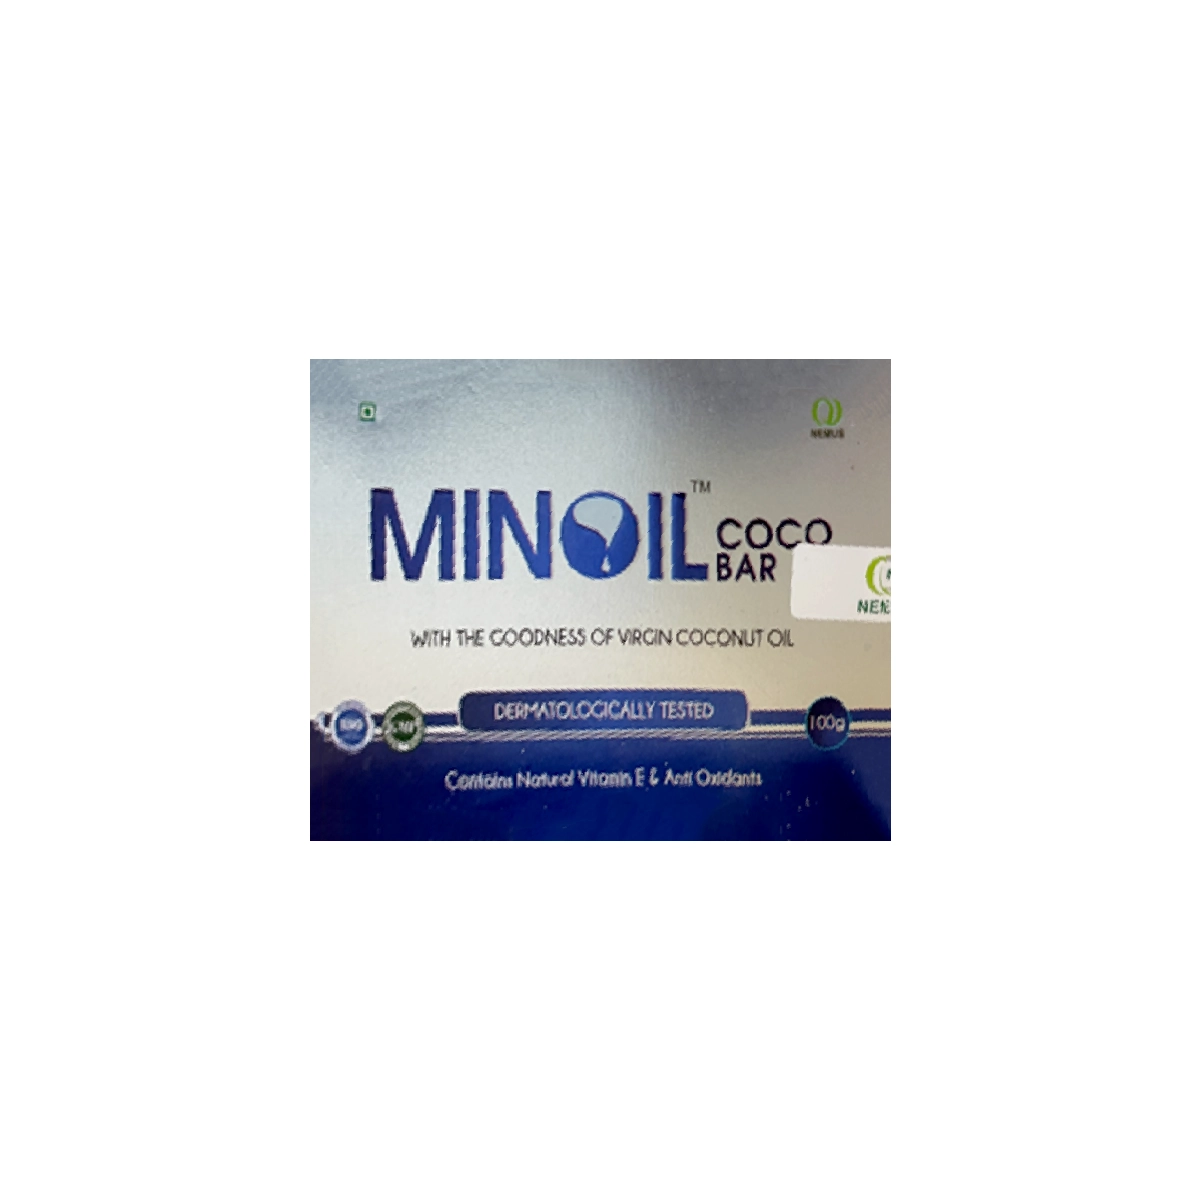 First product image of Minoil Coco Bar 100g